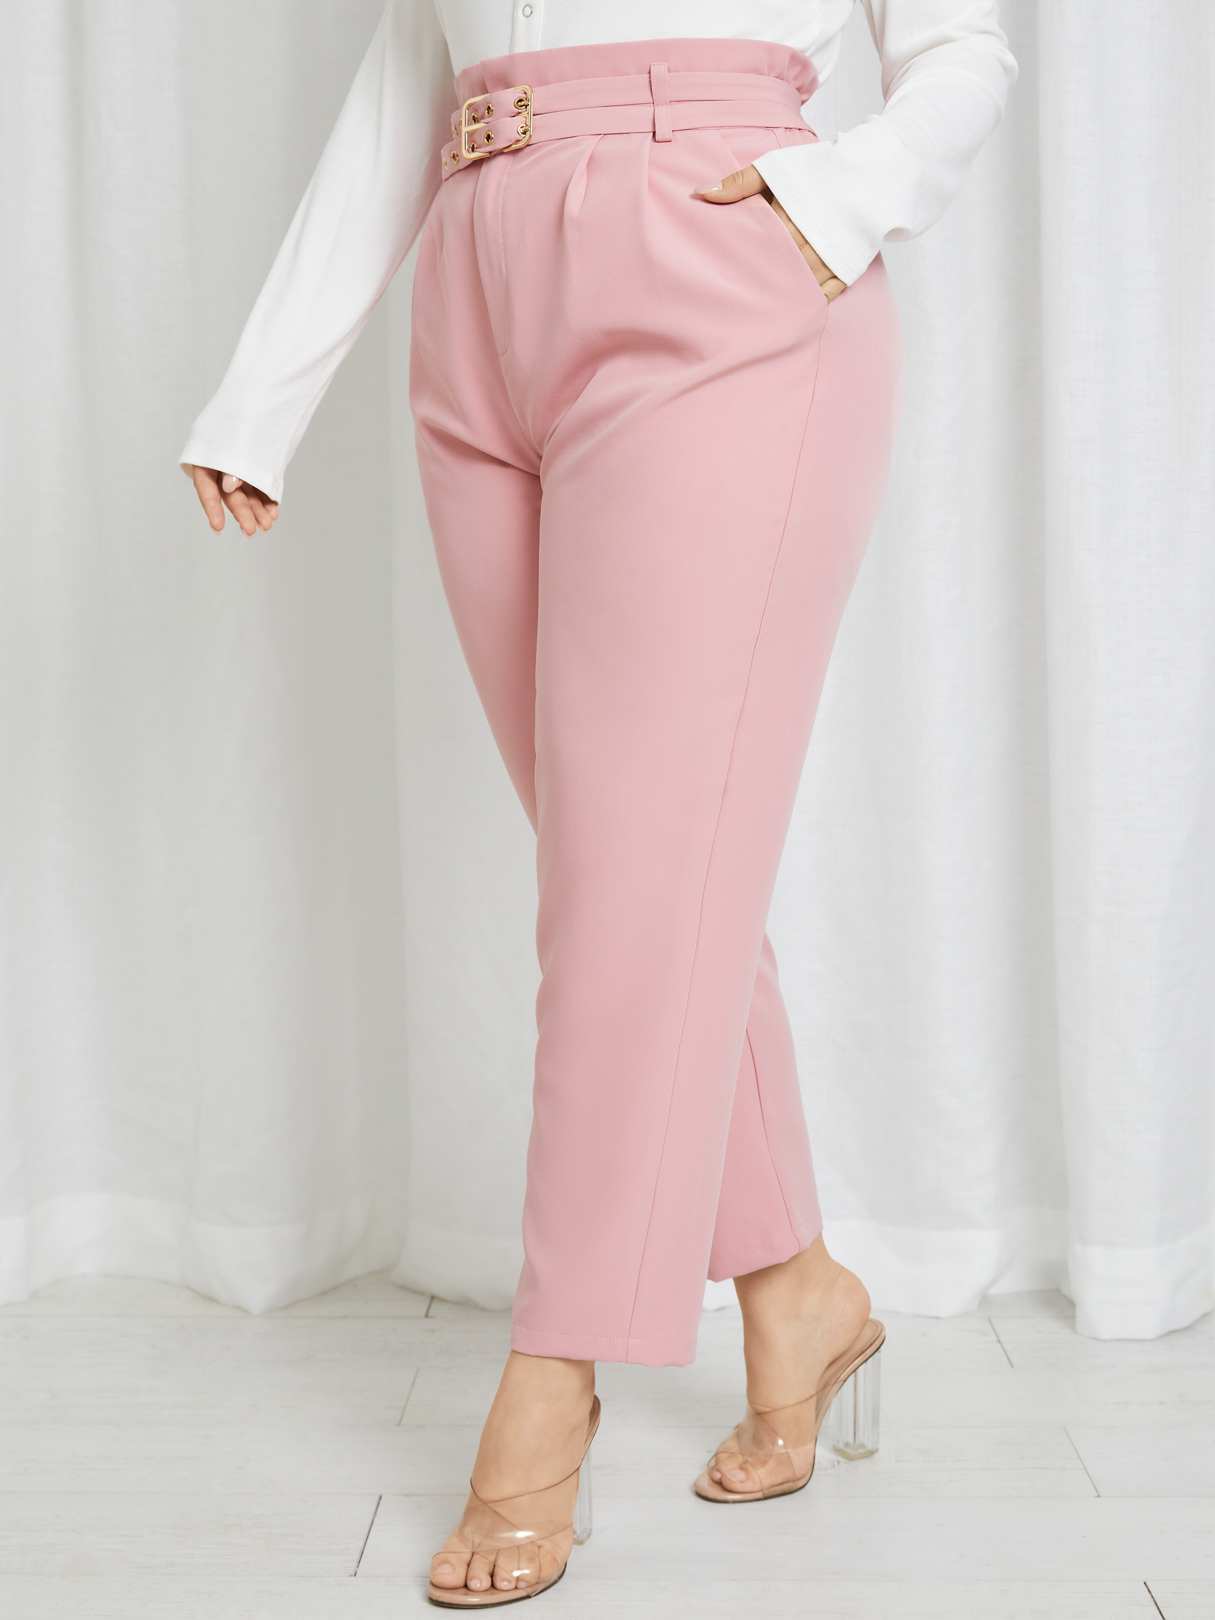 Aovica Plus Size Elegant Long Pants Women Fashion Office Ladies Pencil Pants 2022 Summer Belted Pockets Casual Solid Trousers